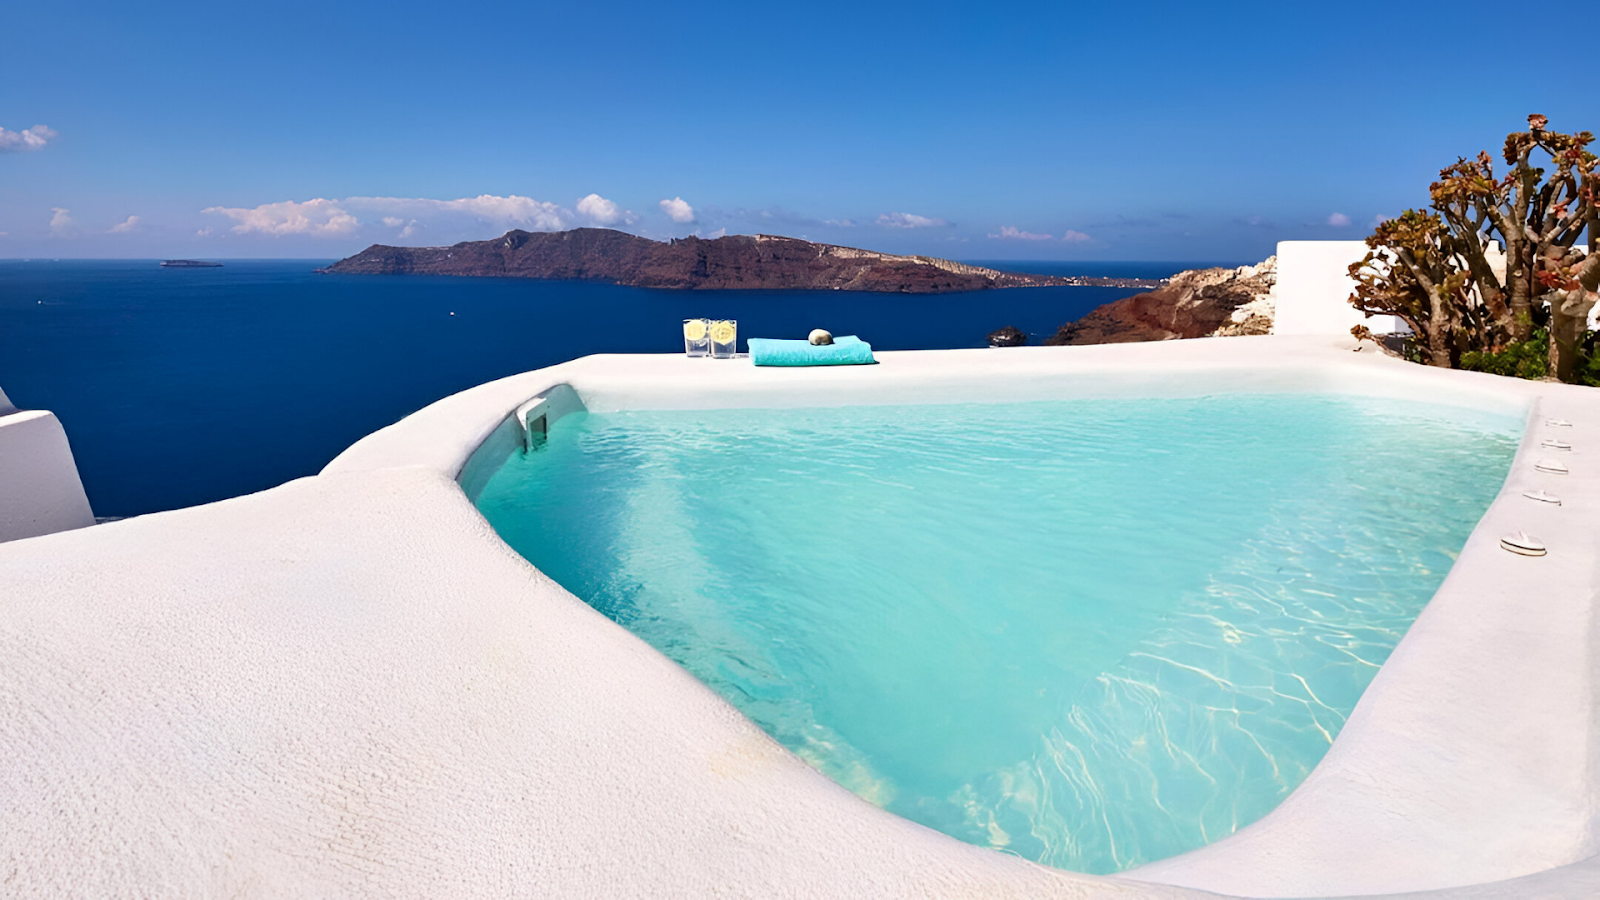 A pool overlooking the sea of a cave house in Santorini